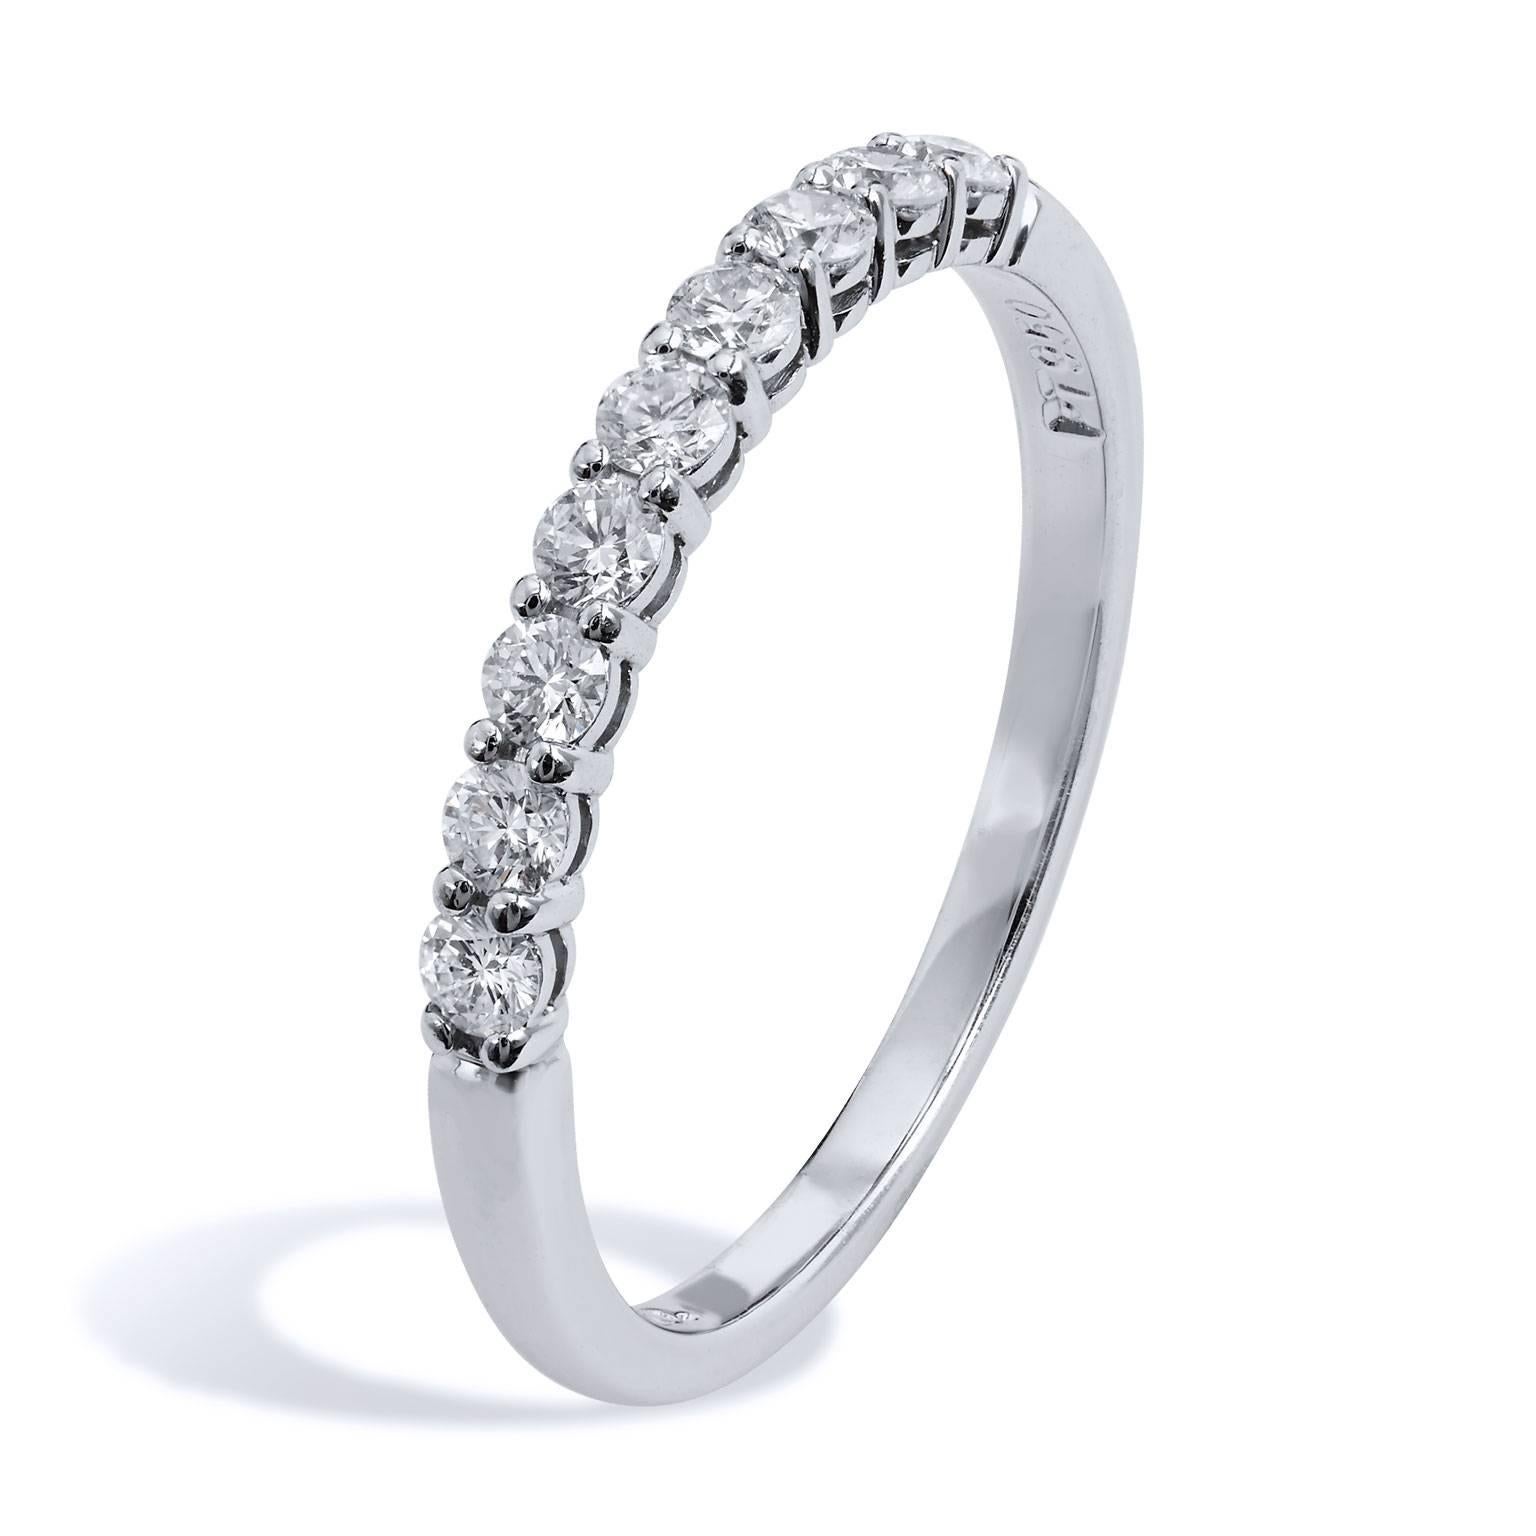 Pristine beauty resonates with this previously loved Tiffany & Co. platinum band ring featuring nine round diamonds with at total weight of 0.27 carat of pave-set diamond (size 6).